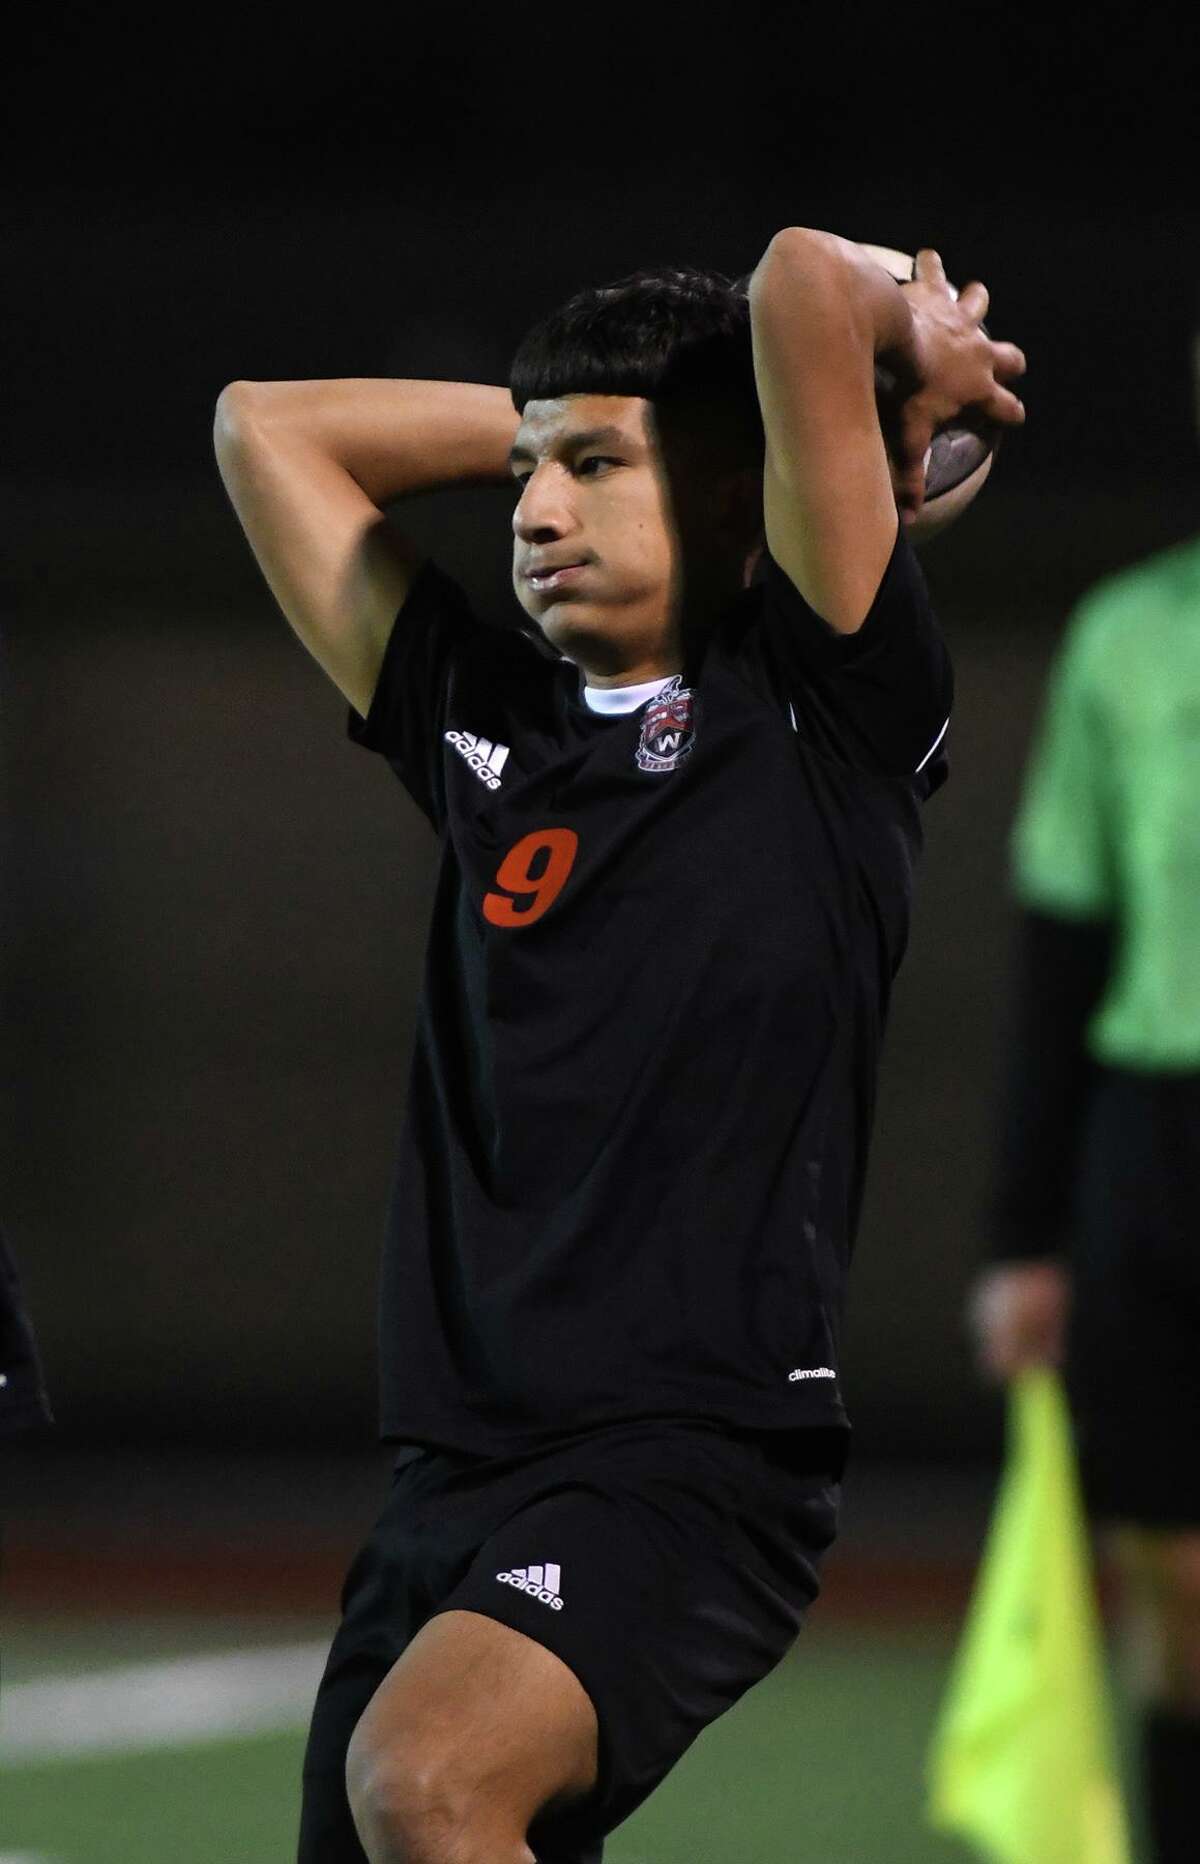 Spring and Aldine ISD boys soccer coaches released the All-District 14-6A teams following the conclusion of each team’s 2020-21 regular season and postseason. Westfield High had three athletes named honorable mention including senior defender Elias Macias (9).